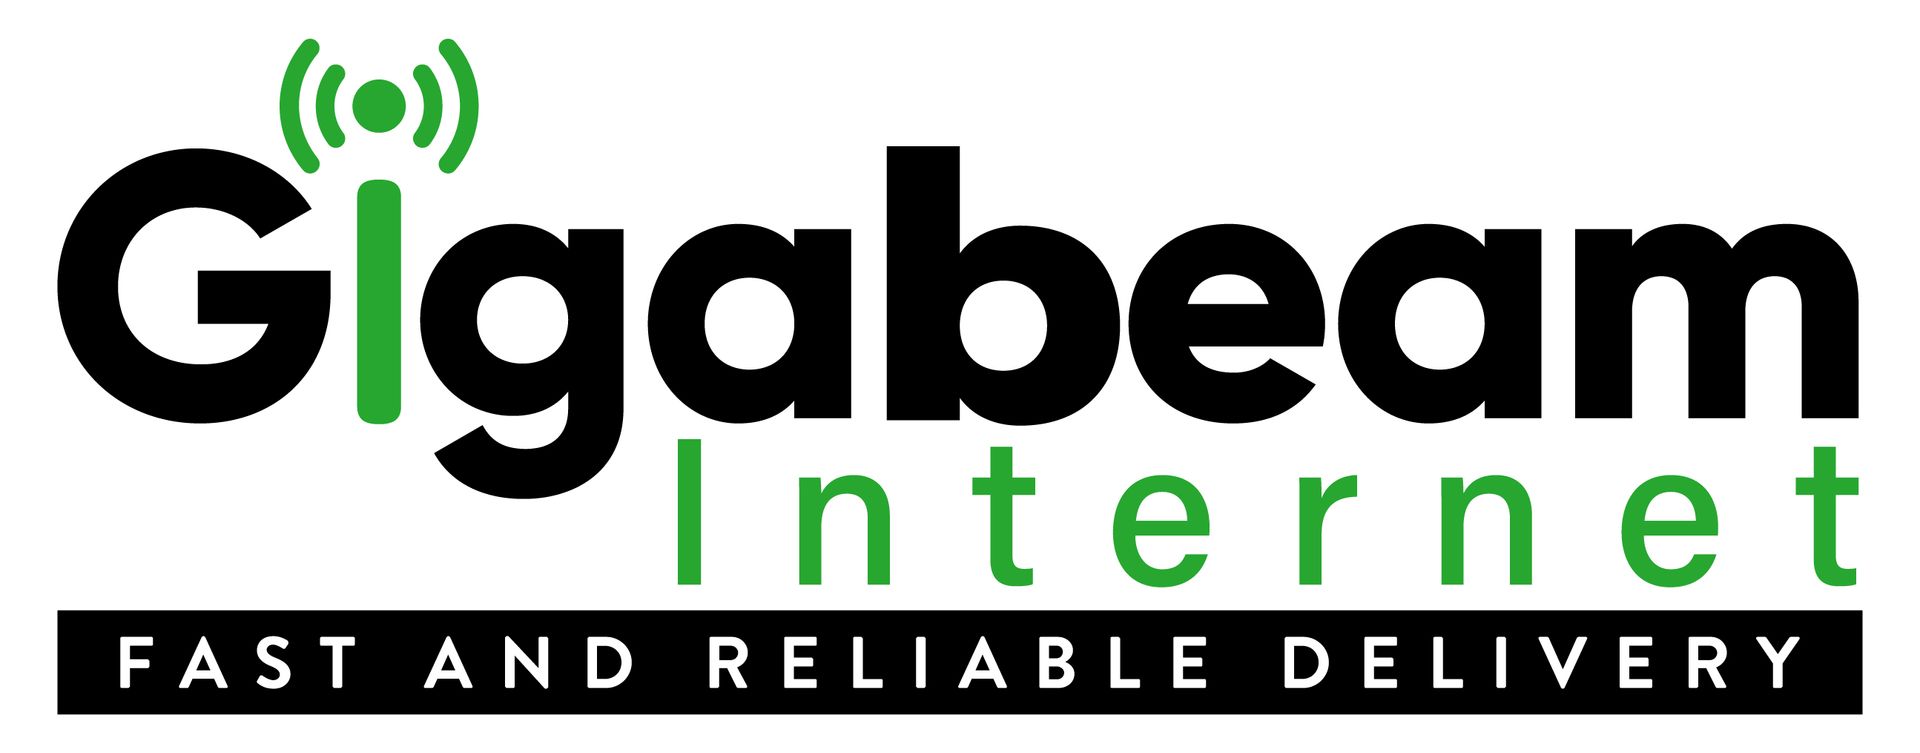 The logo for gigabeam internet is black and green and says fast and reliable delivery.